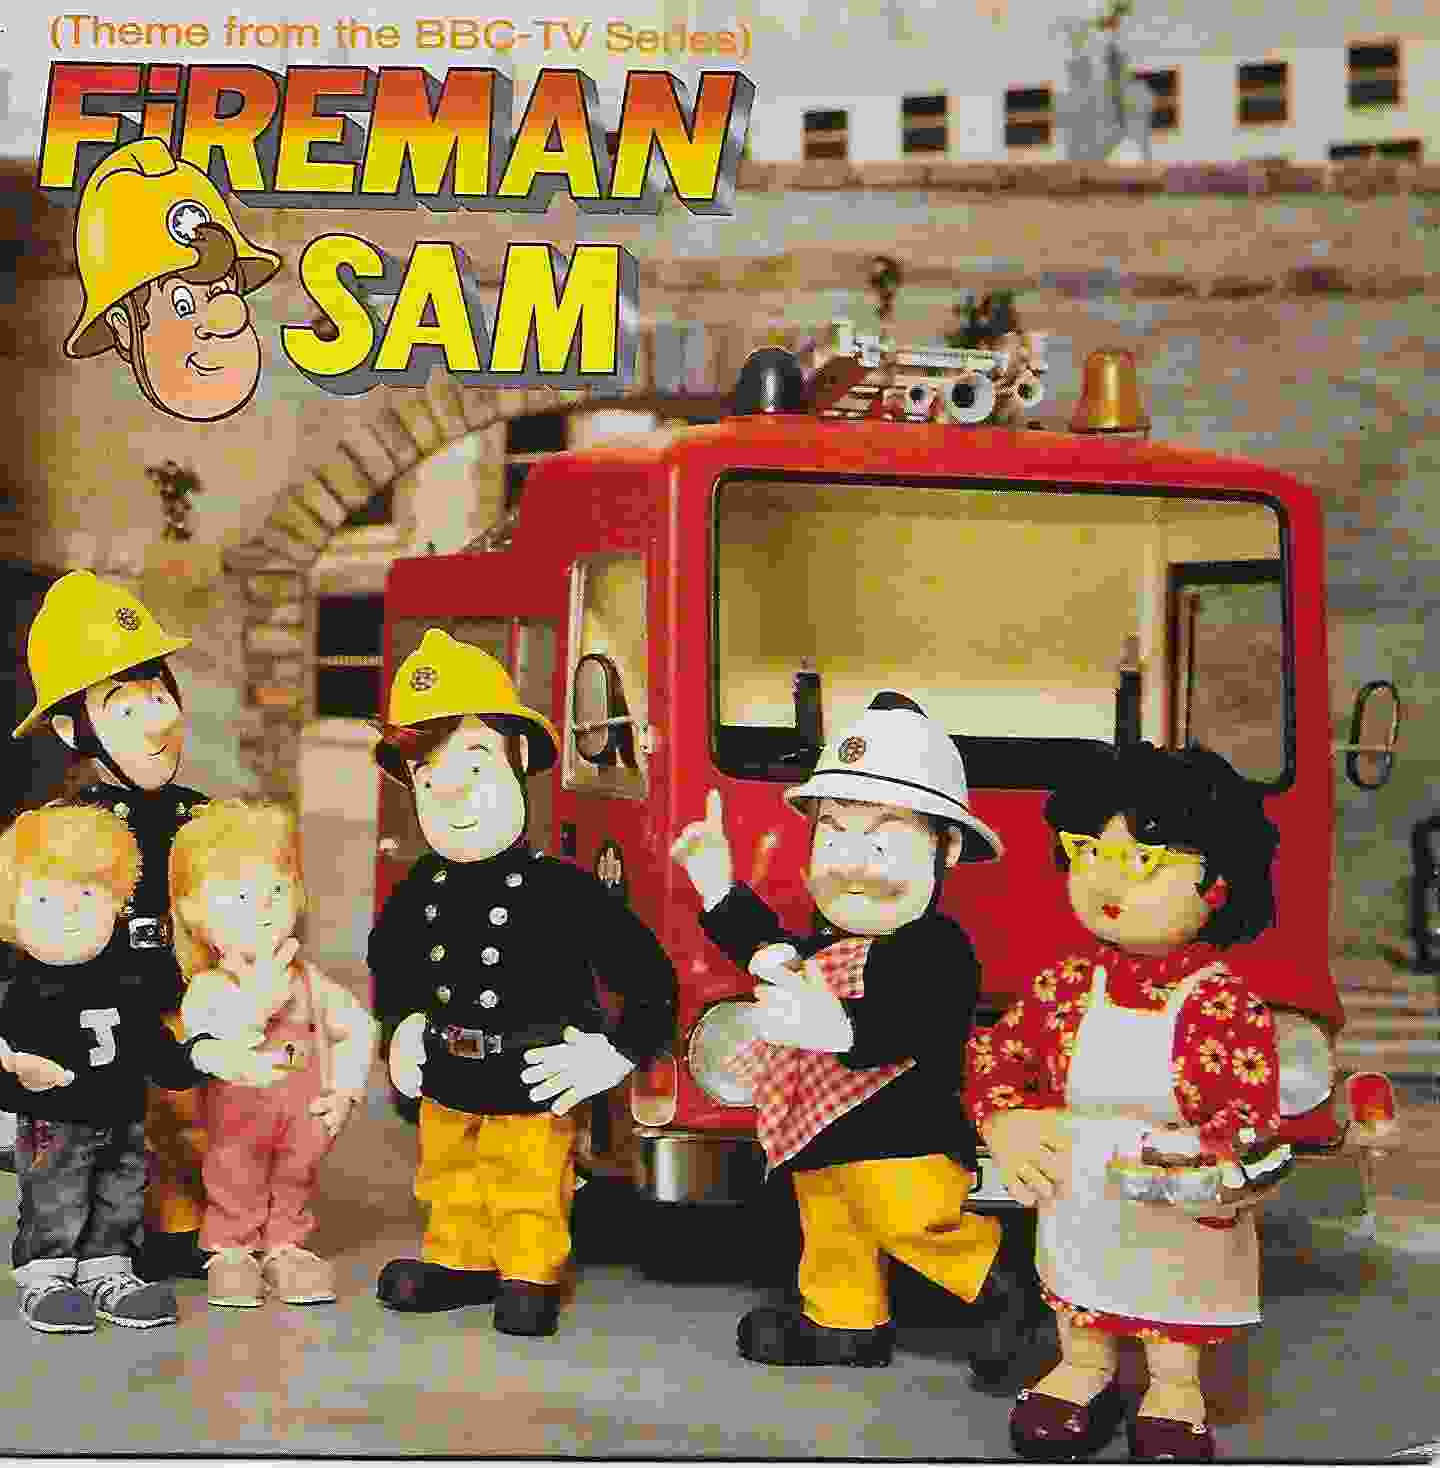 Picture of RESL 224 Fireman Sam by artist Maldwyn Pope from the BBC singles - Records and Tapes library